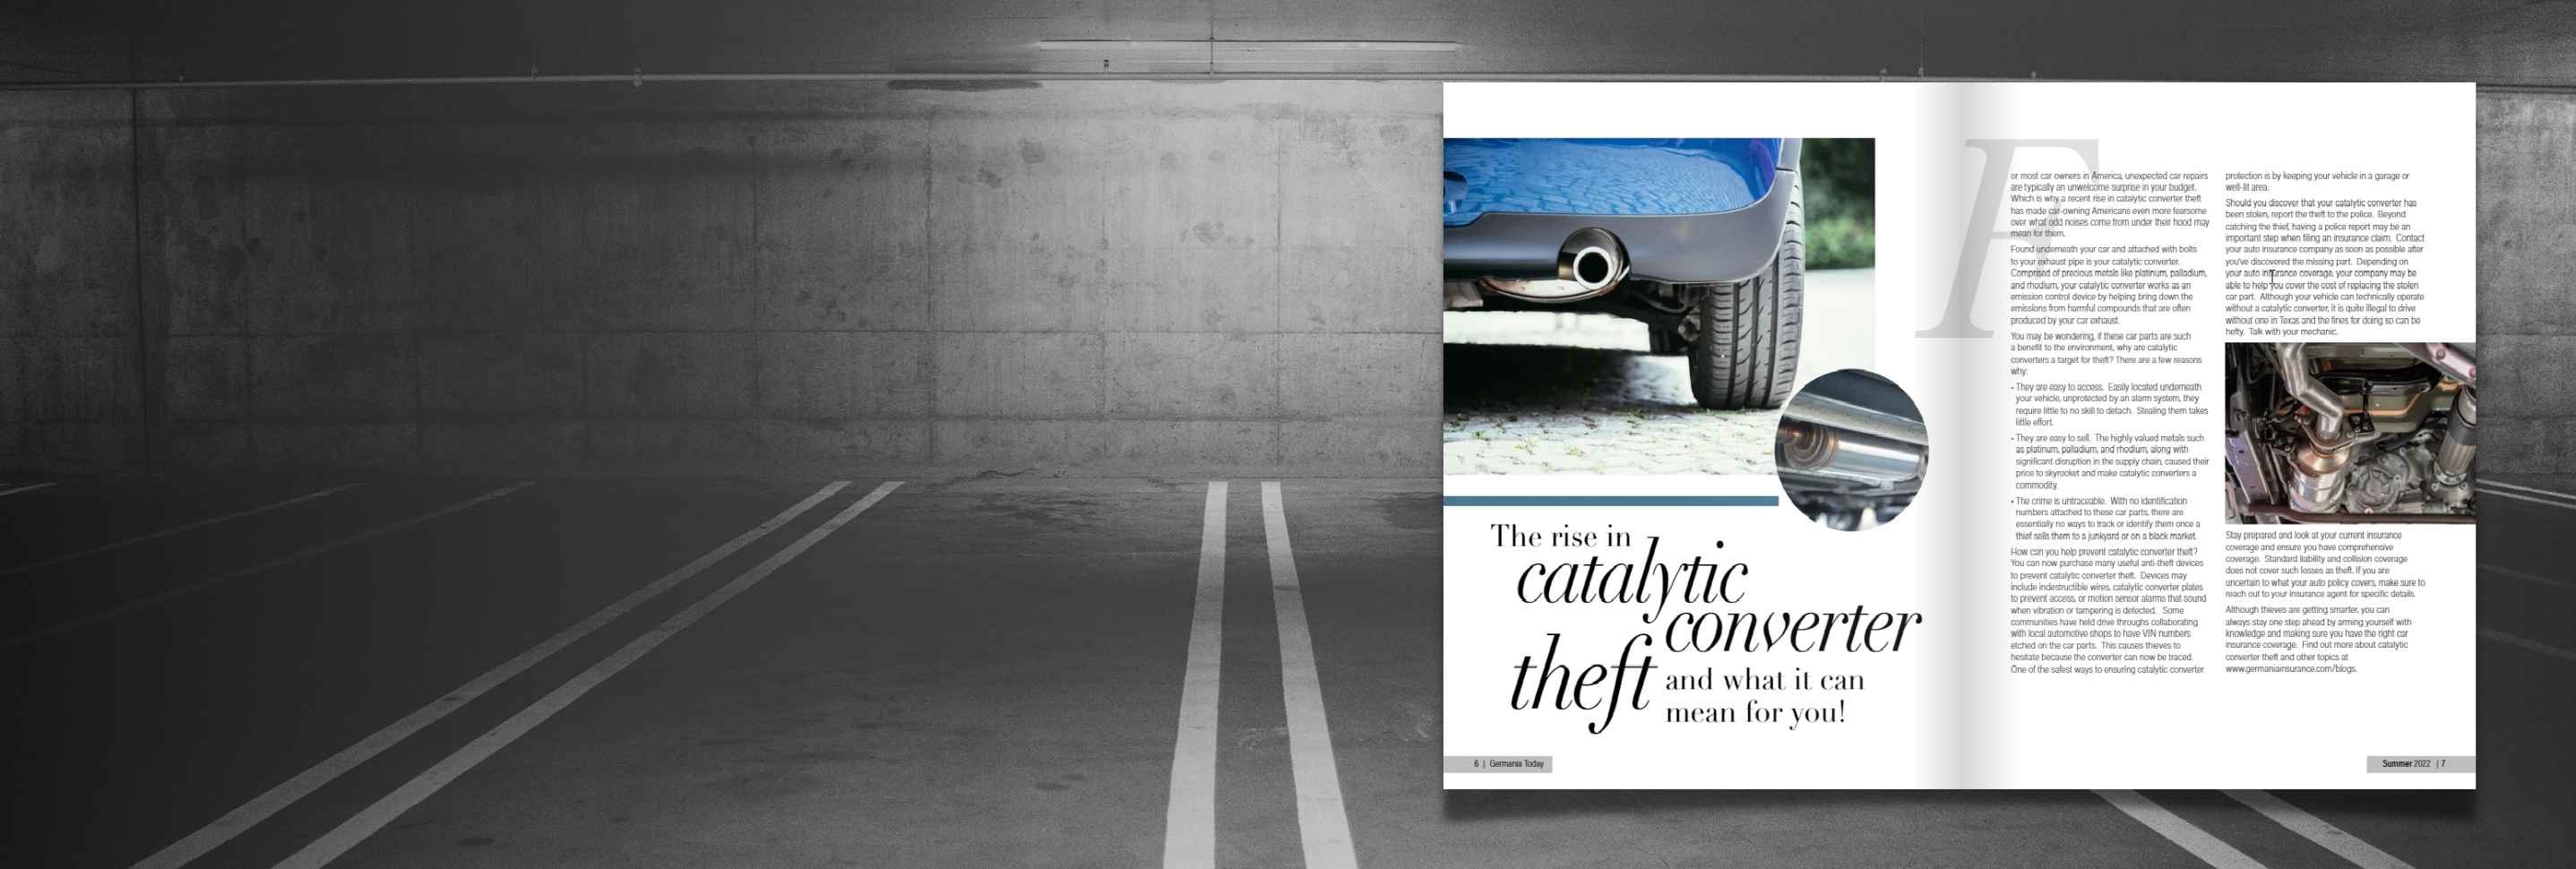 The rise in catalytic converter theft and what it can mean for you